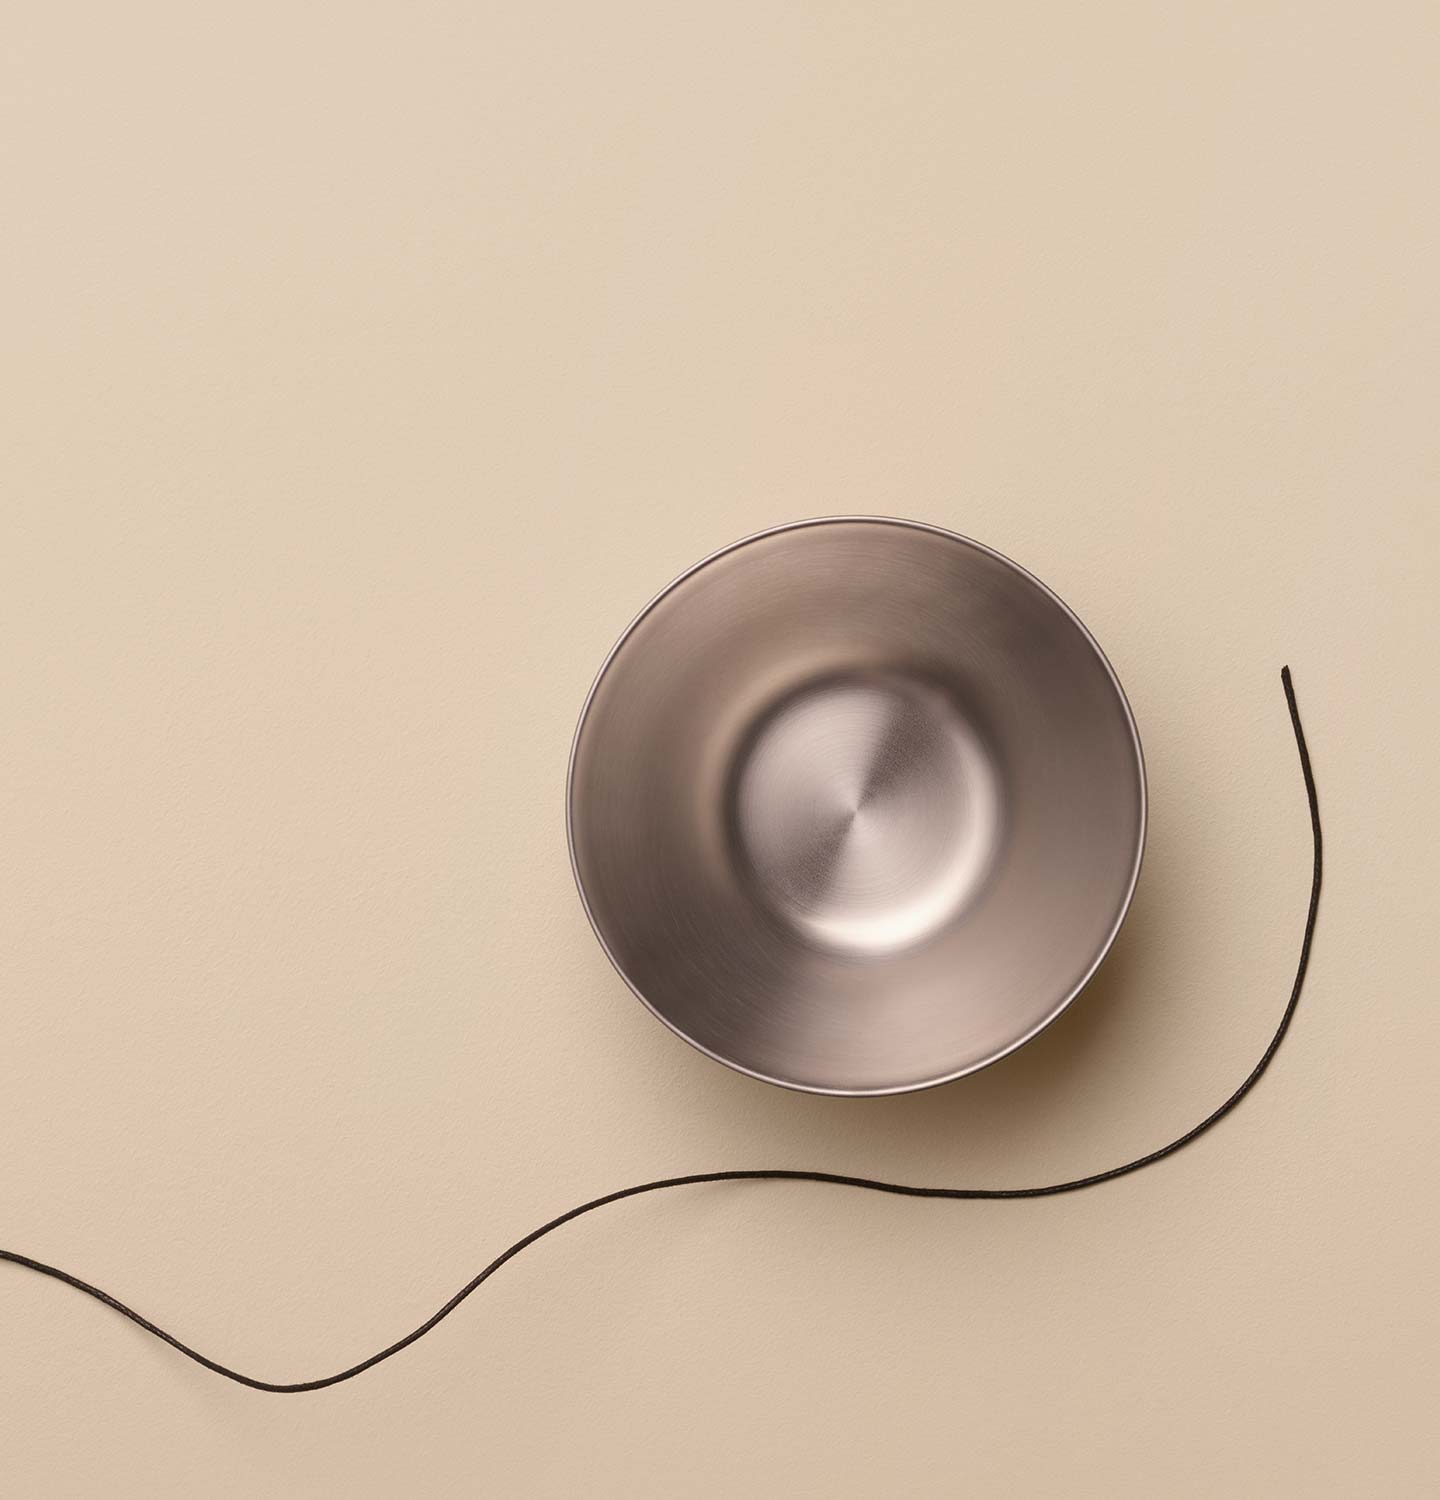 Aesop Stainless Steel Bowl arranged alongside a dark string on a beige textured surface.